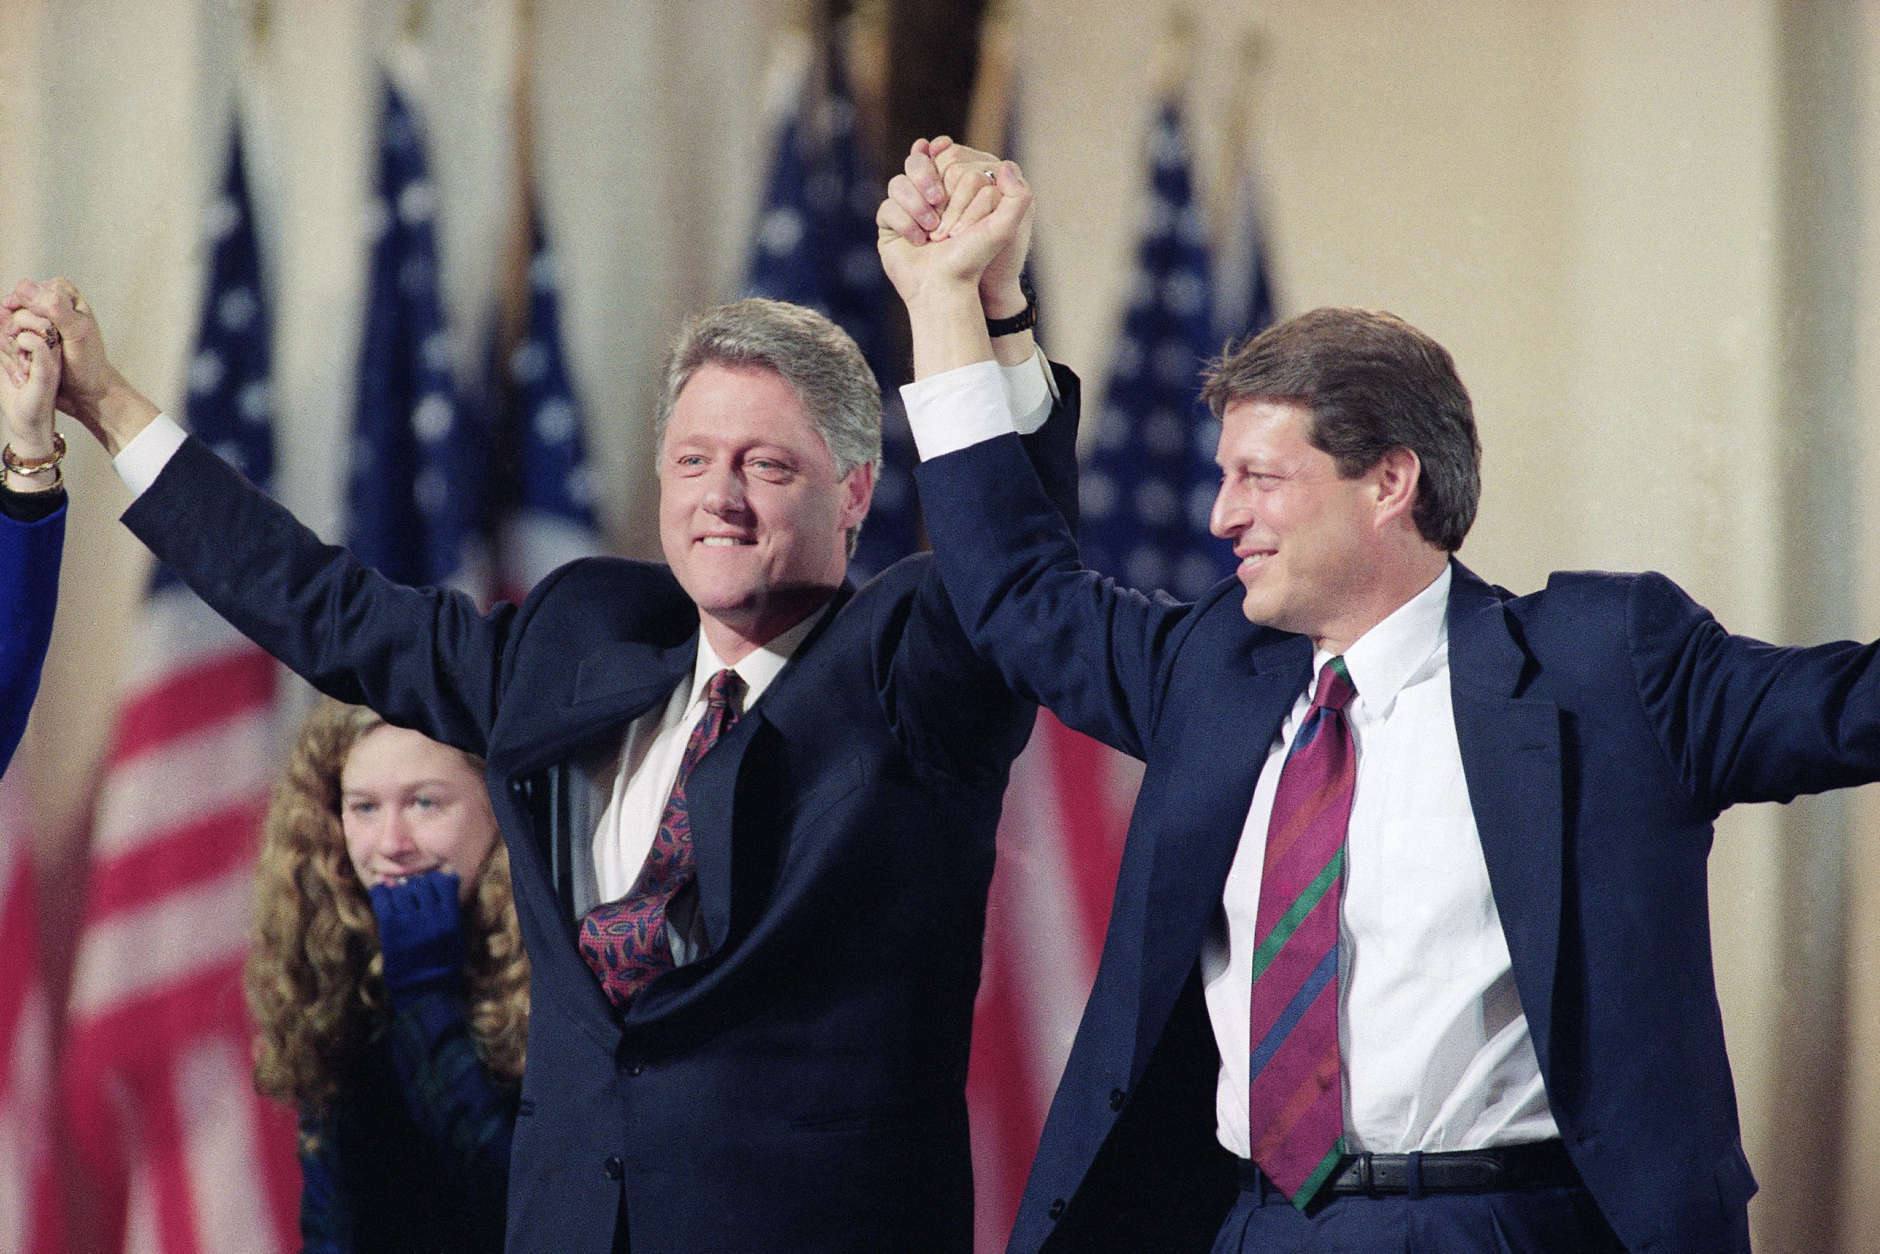 Bill Clinton with Al Gore raise hands in victory after landslide election in Little Rock, Arkansas on November 3, 1992. (AP Photo)